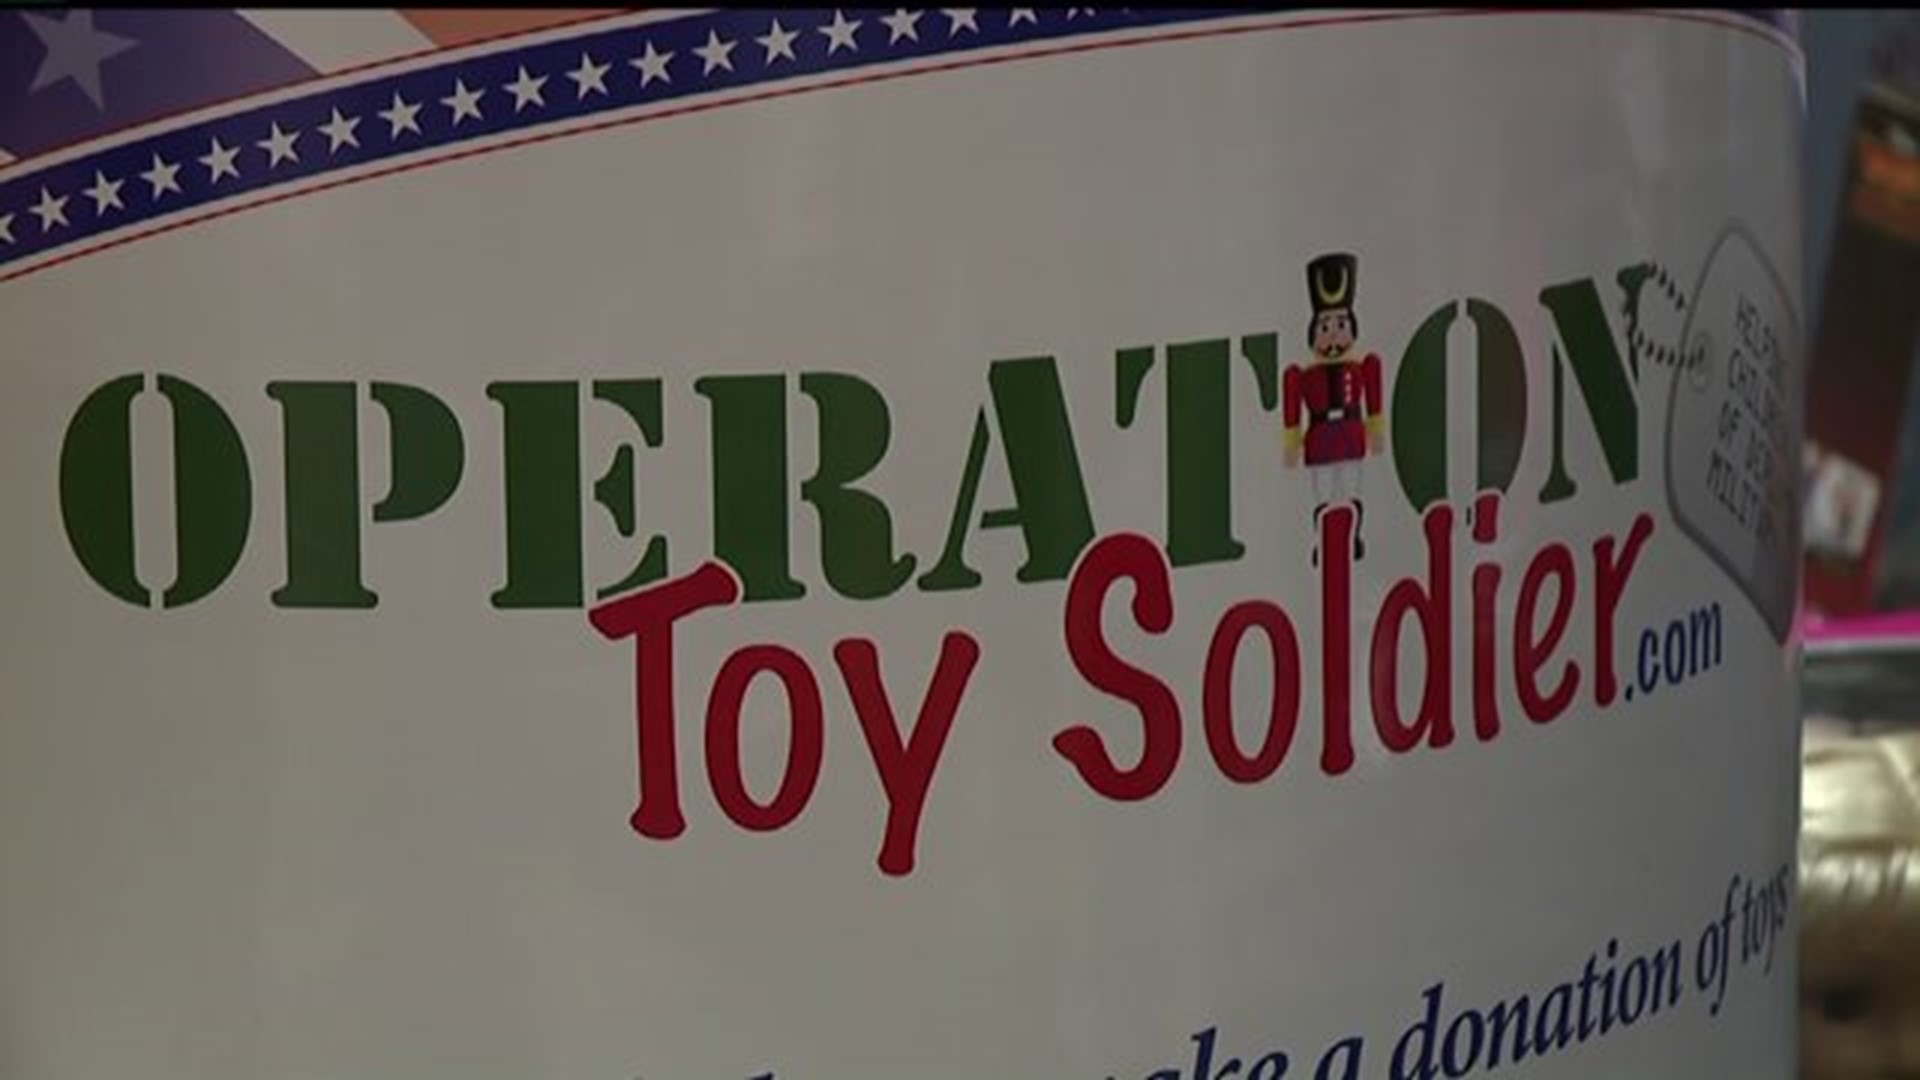 Operation Toy Soldier